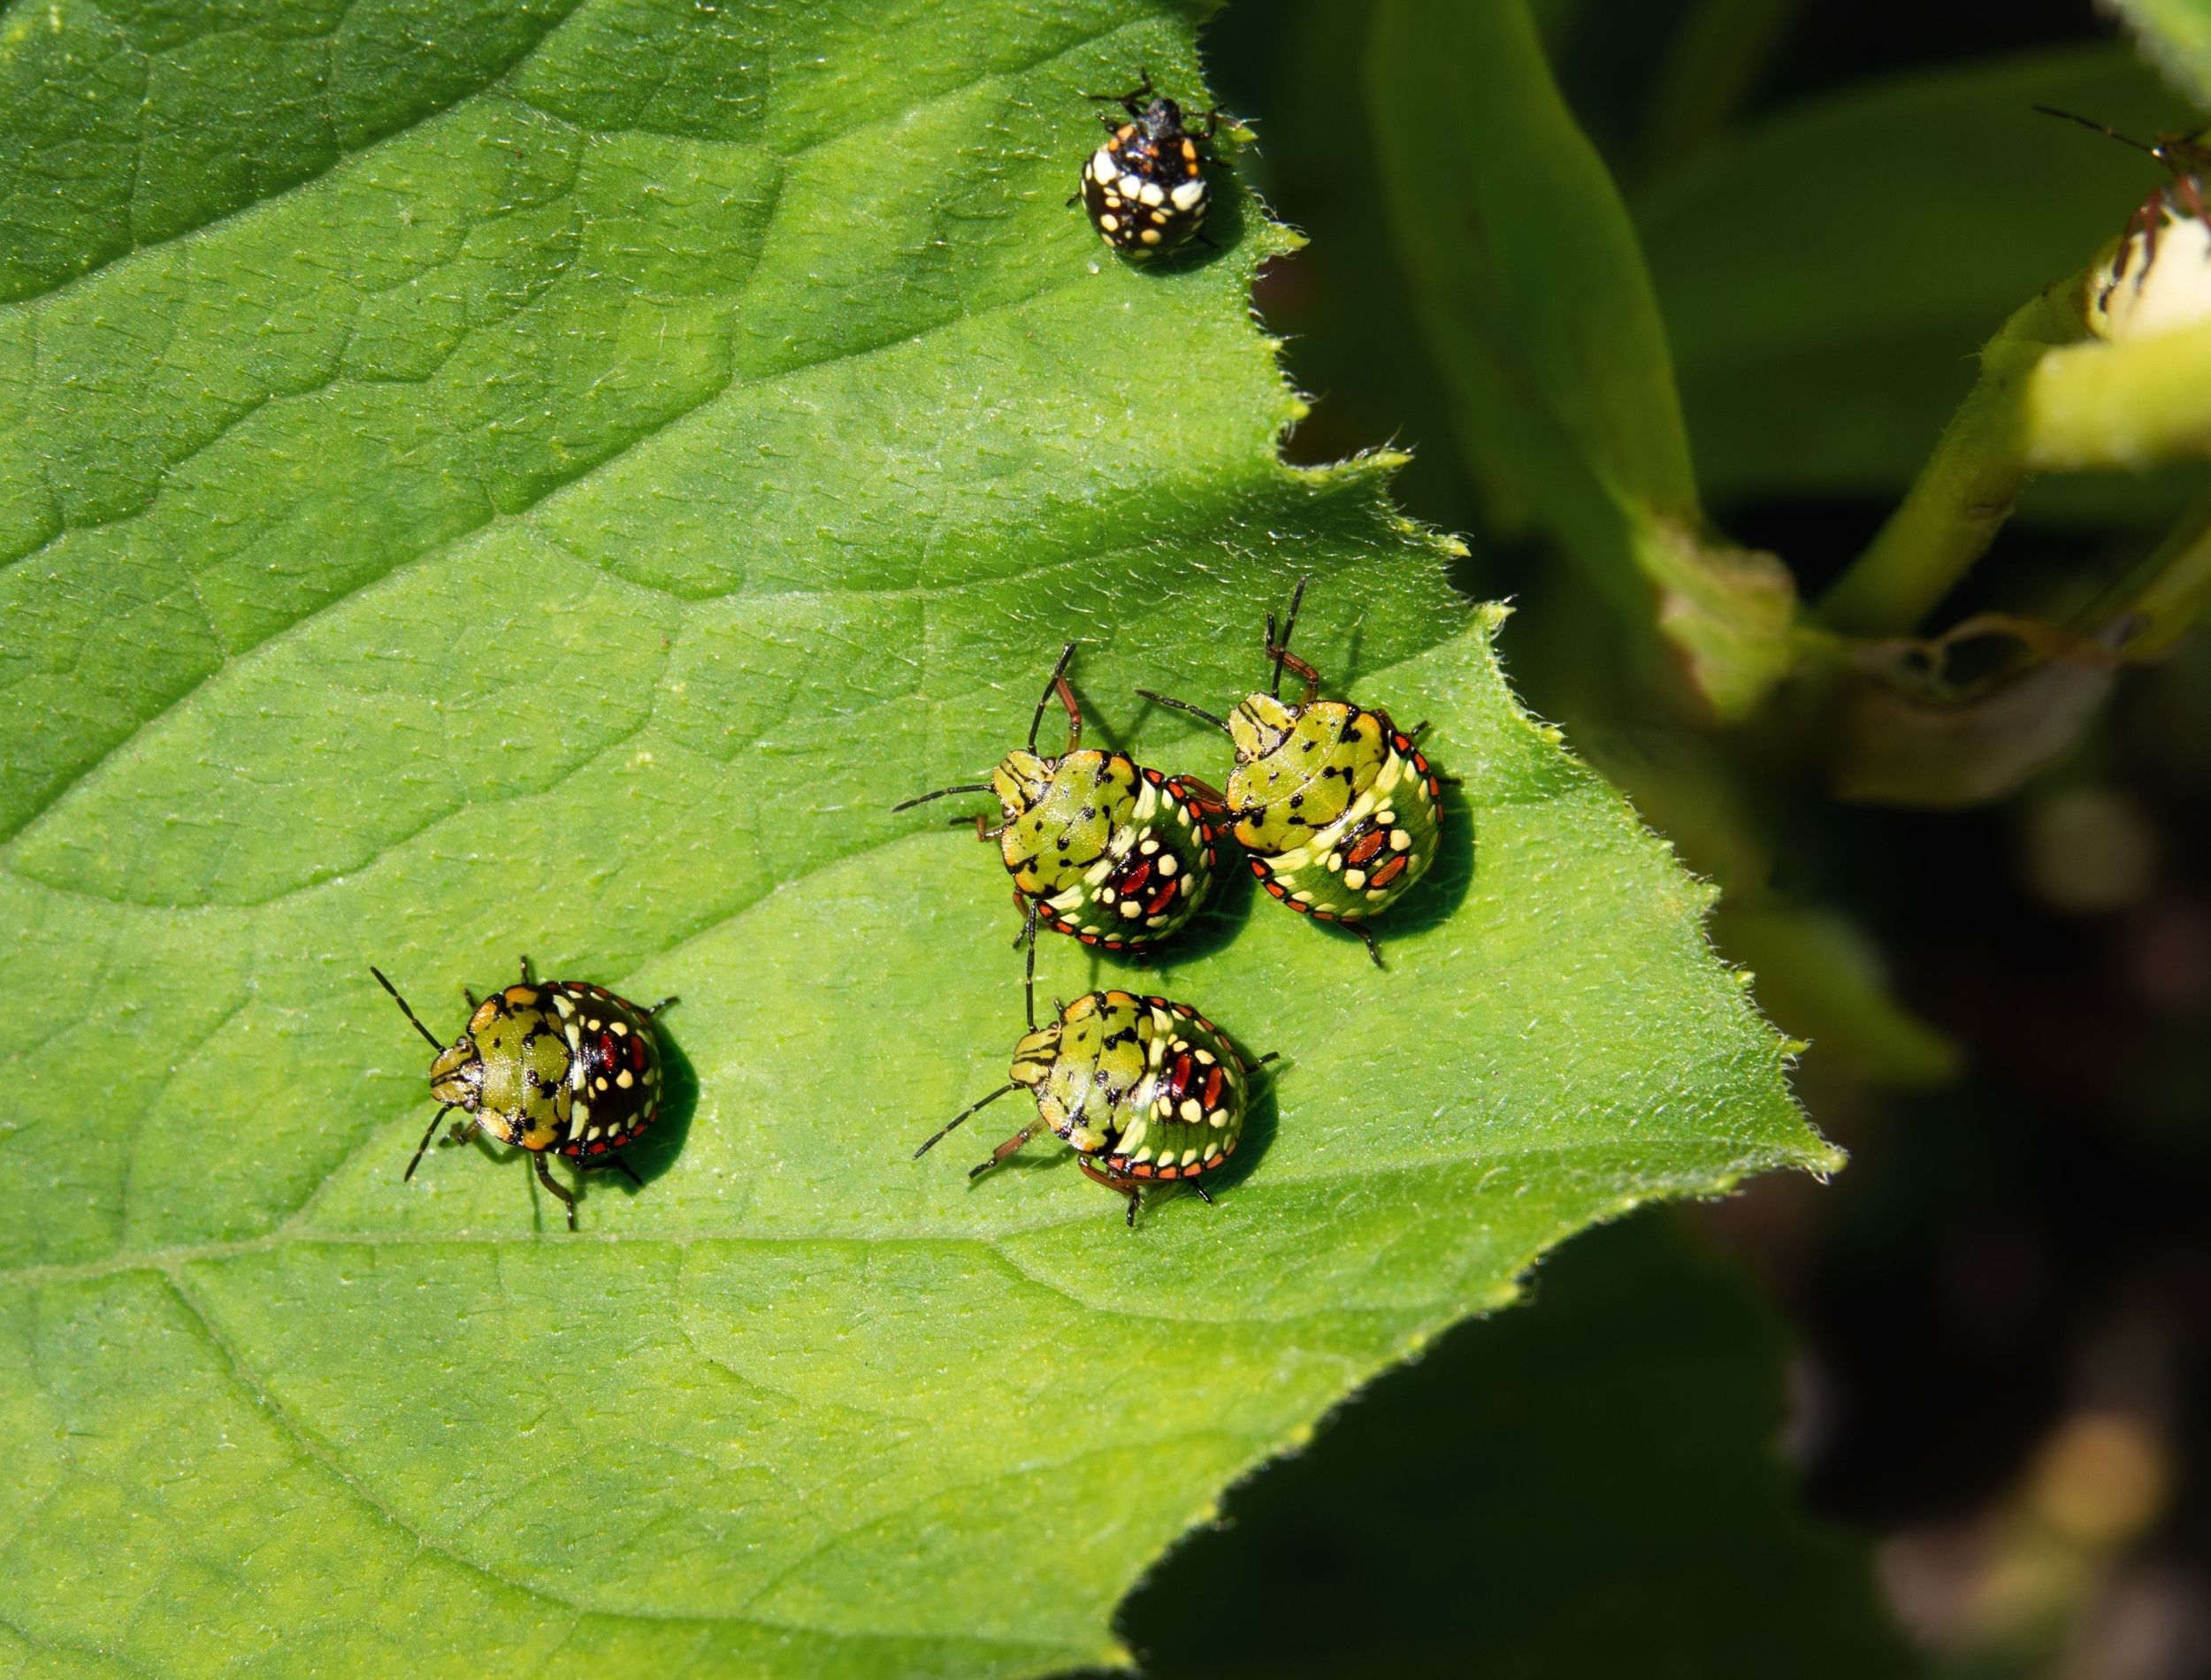 Southern green stink bug babies on zucchini leaf. Group of 4th and 2th instar nymphs from southern green shield bug or Nezara viridula. Invasive pests in garden. Stunning markings. Selective focus.